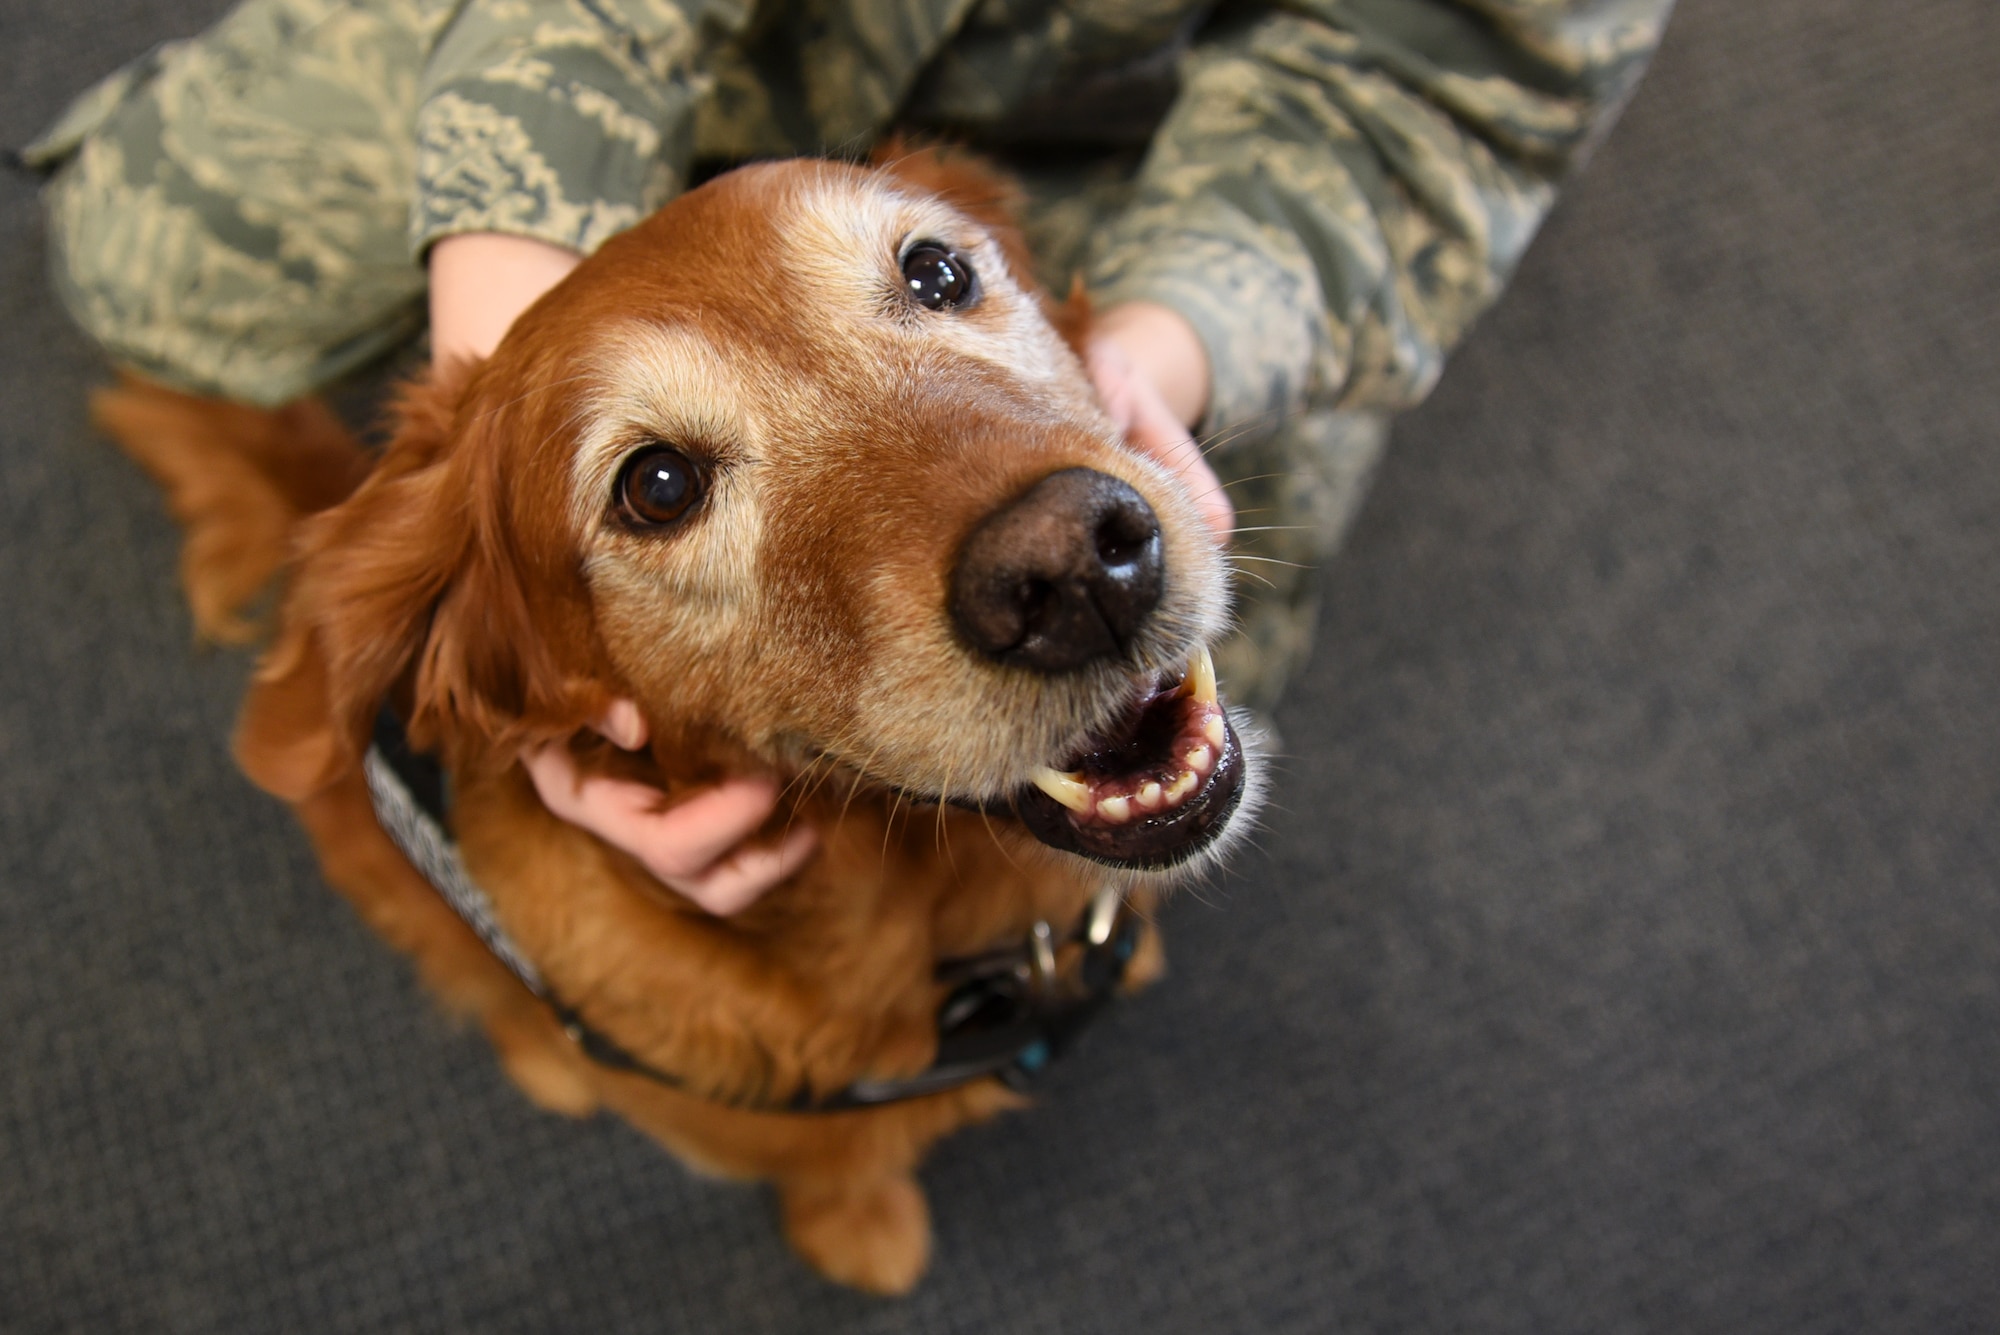 Suzzy, 20th Fighter Wing (FW) Sexual Assault Prevention and Response (SAPR) comfort dog, receives pets from Airman 1st Class Cassidy Woody, 20th FW Public Affairs broadcast journalist, during a SAPR office open house at Shaw Air Force Base, S.C., April 12, 2018. (U.S. Air Force photo by Airman 1st Class Kathryn R.C. Reaves)